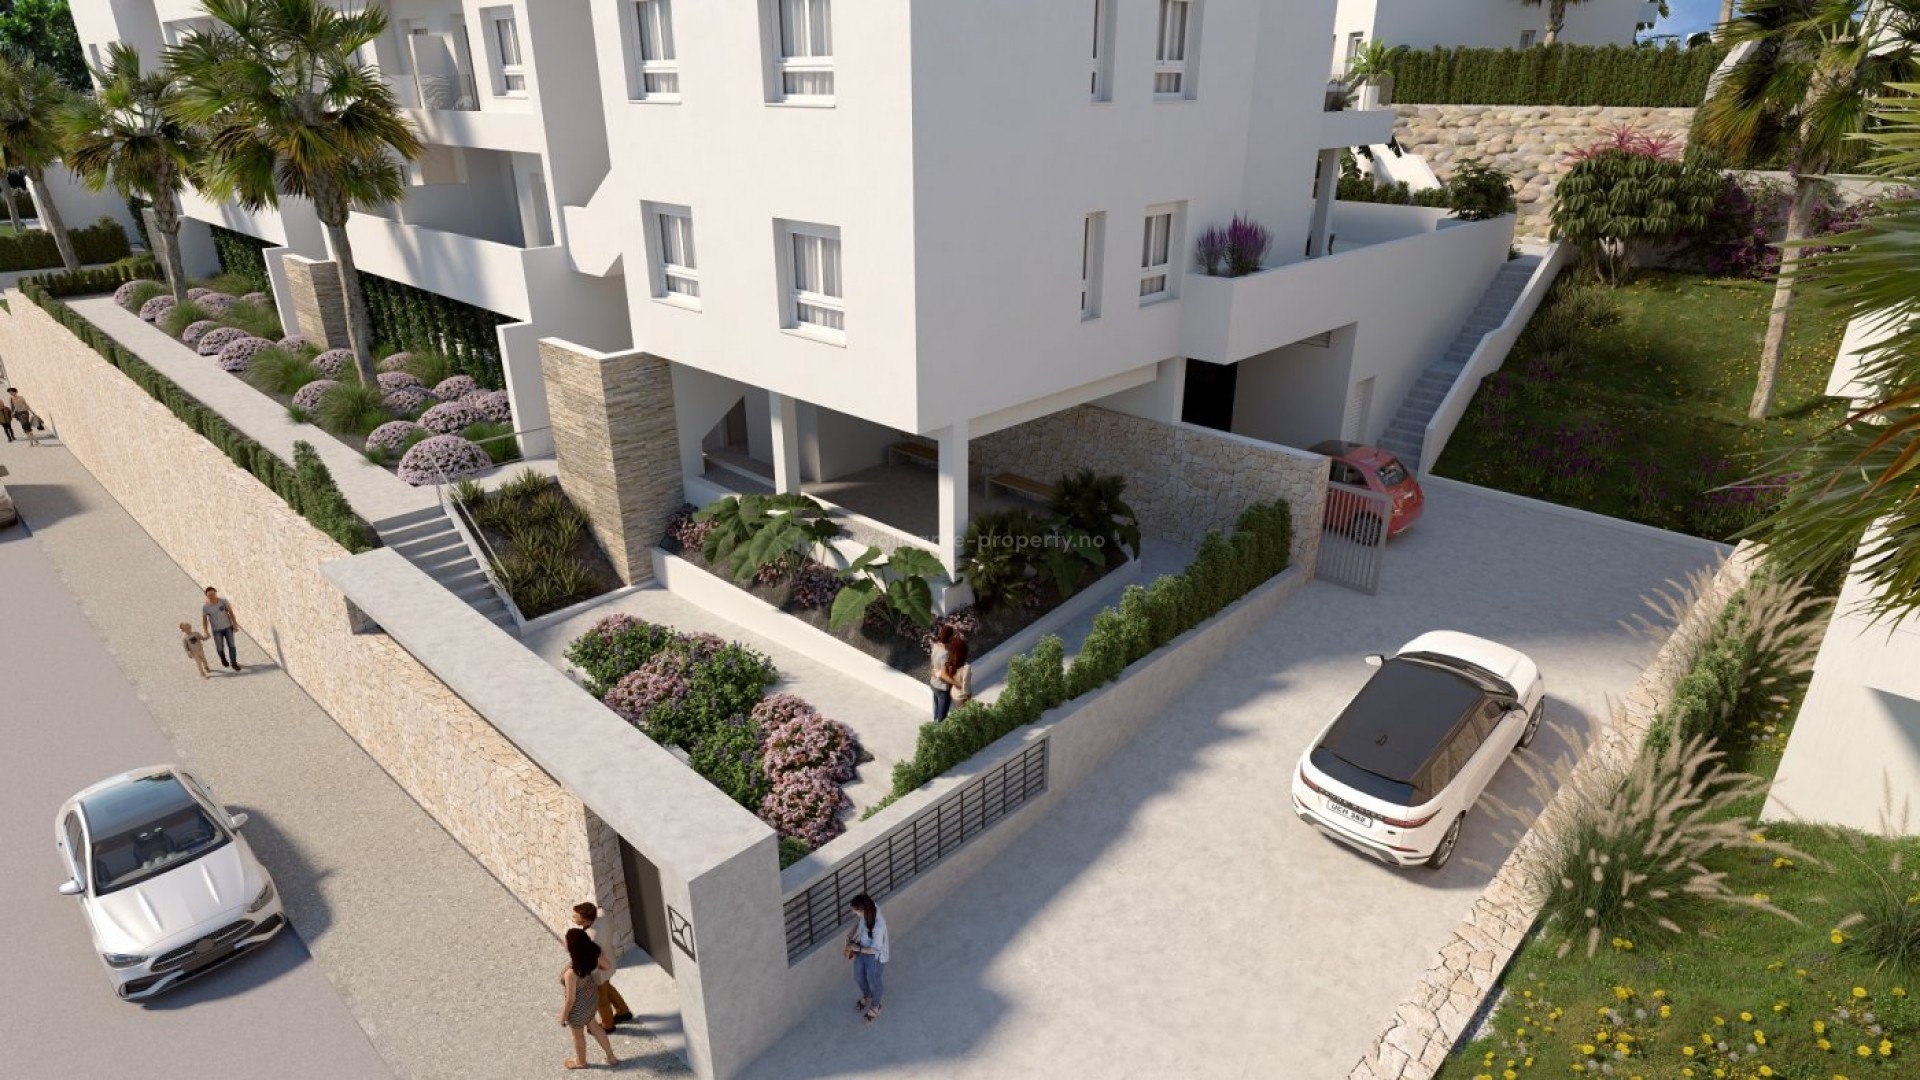 Brand new residential complex in La Finca Golf, Algorfa, 3 bedrooms, 2 bathrooms, open kitchen with living room, garden with private pool, terrace and parking